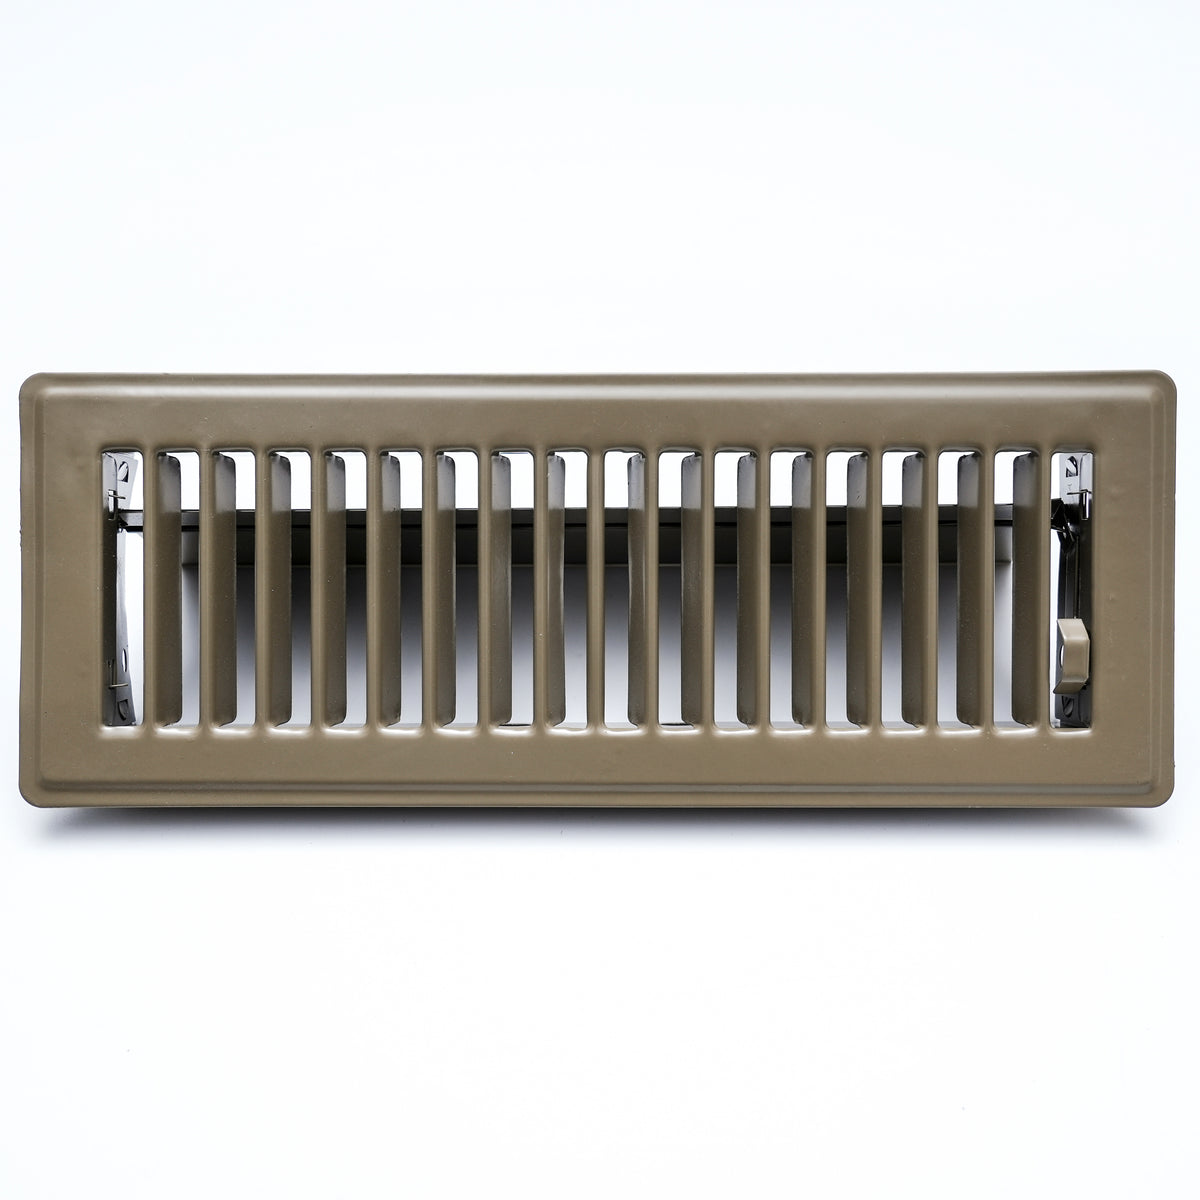 airgrilles 3" x 10" floor register with louvered design   heavy duty walkable design with damper   floor vent grille   easy to adjust air supply lever   brown hnd-flg-br-3x10  - 1